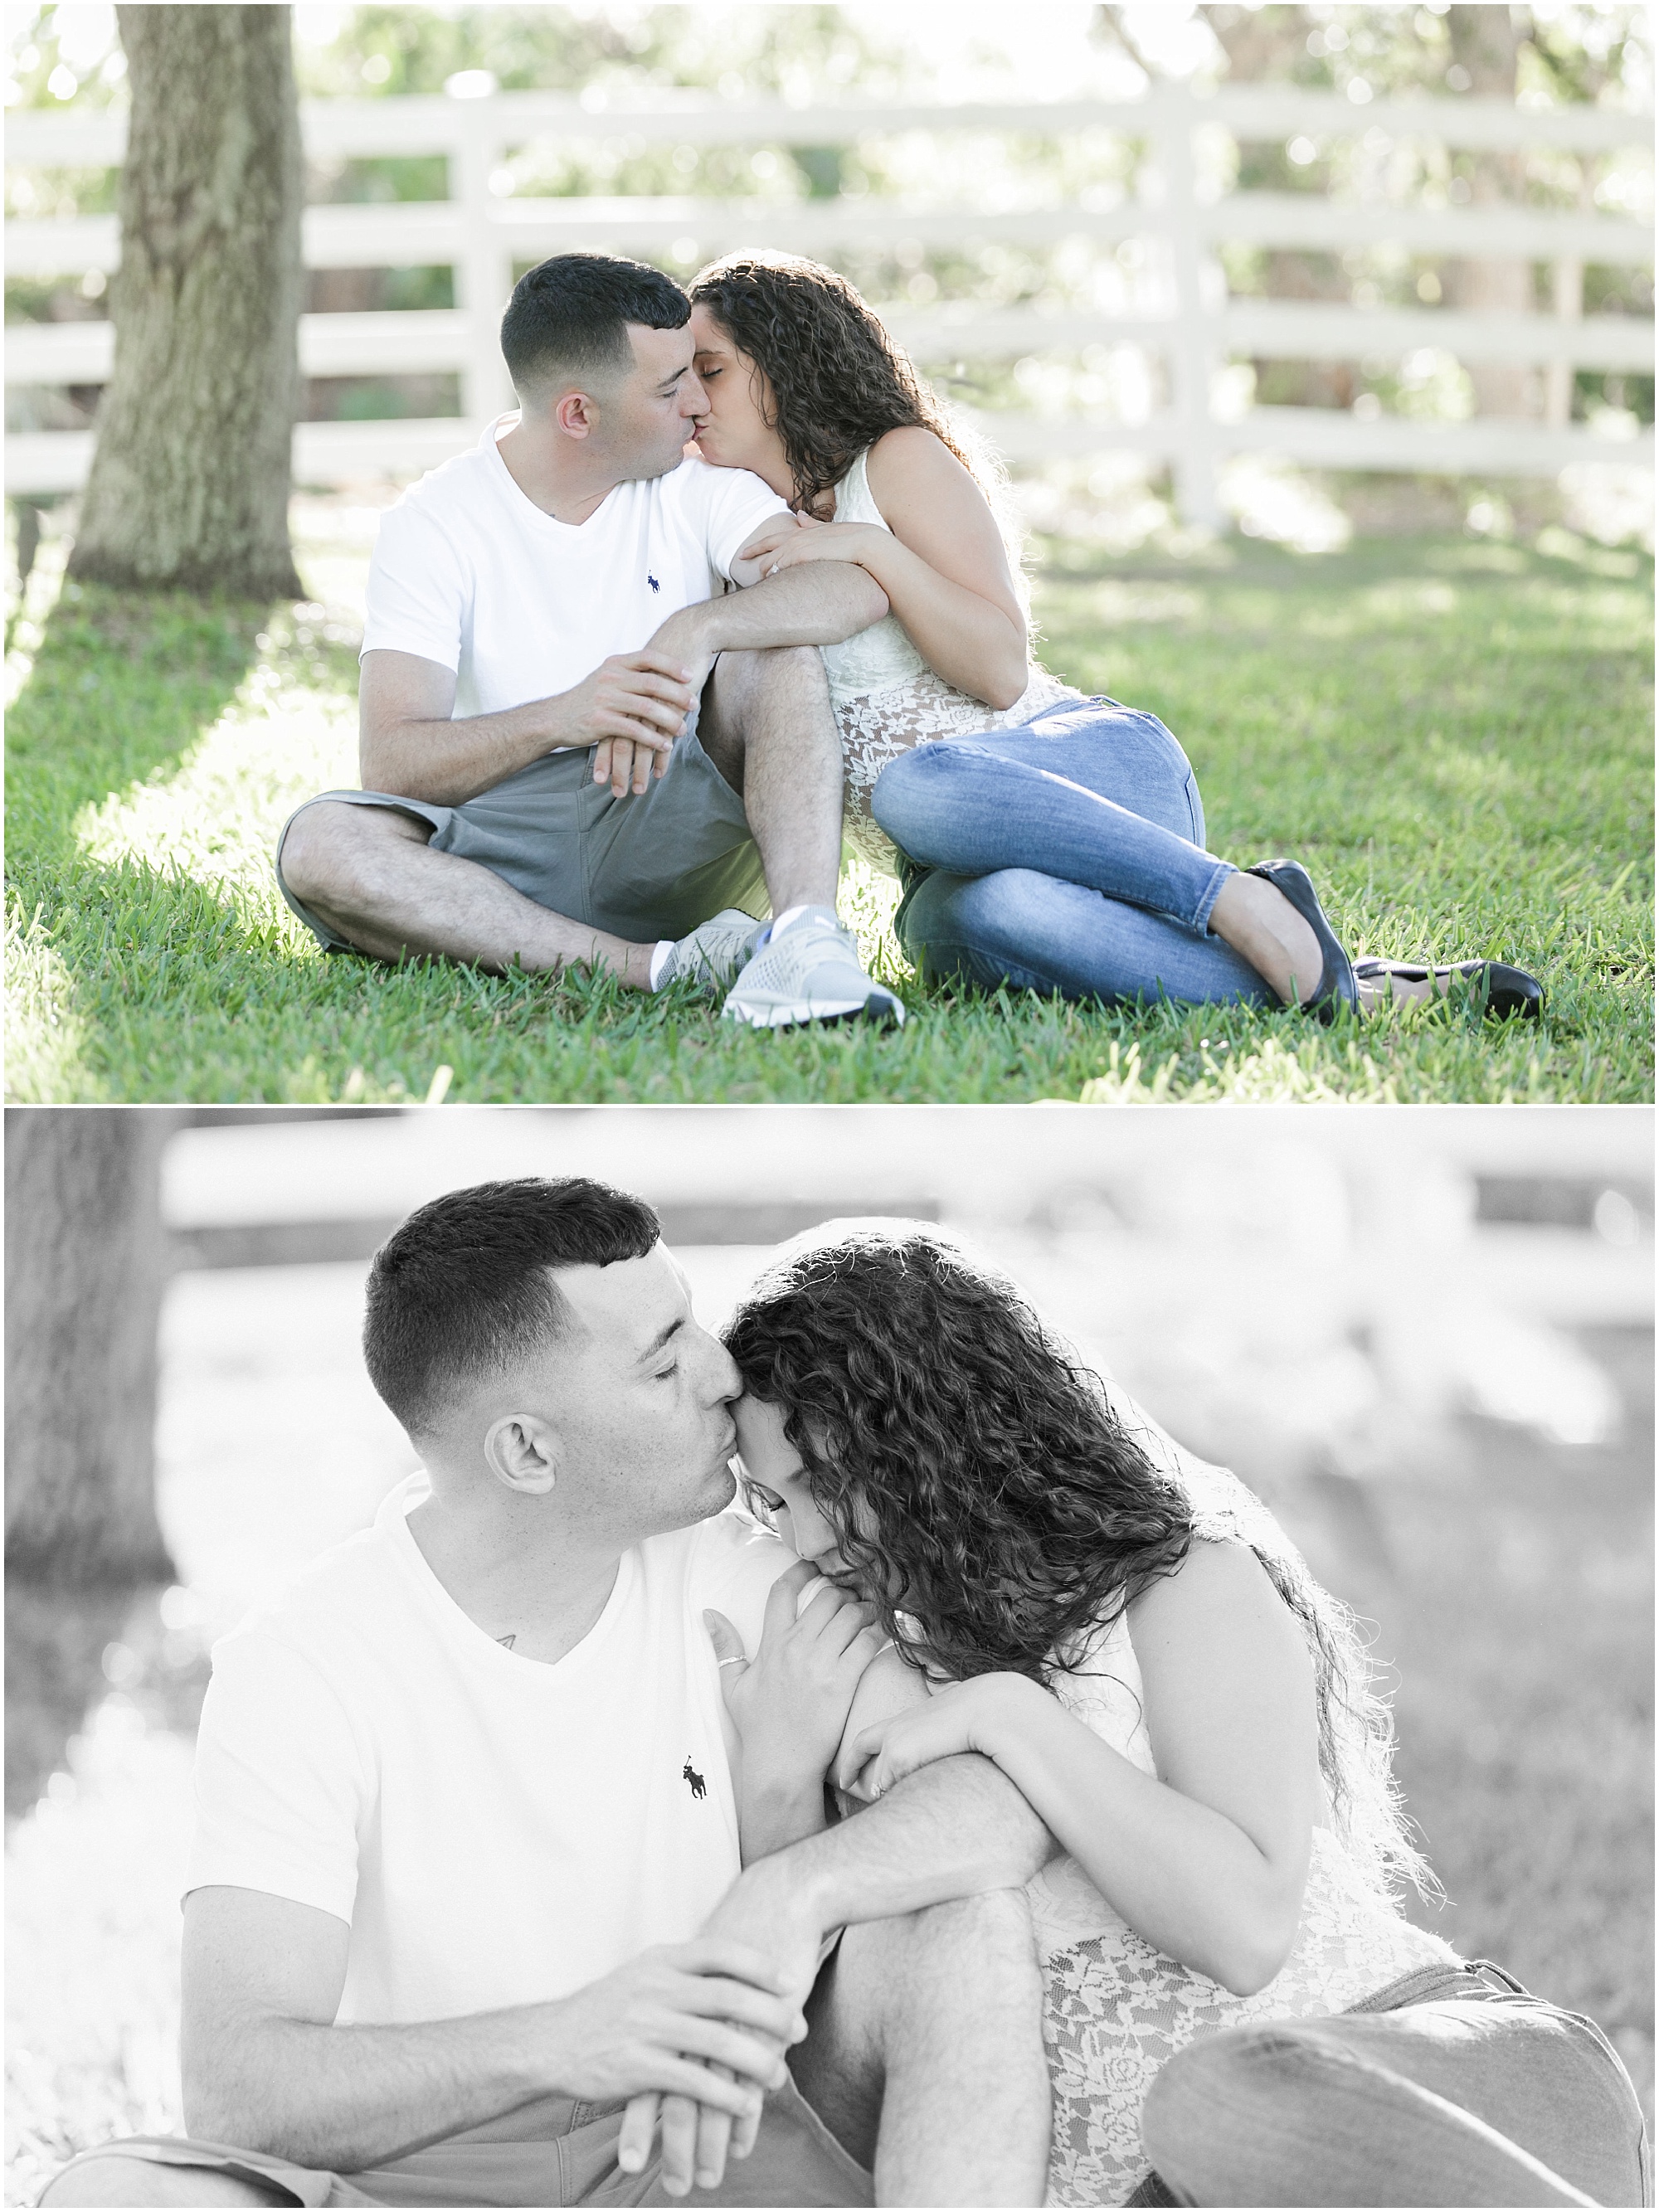 Guy and girl kissing and snuggling while sitting in the grass under the shade of trees. 